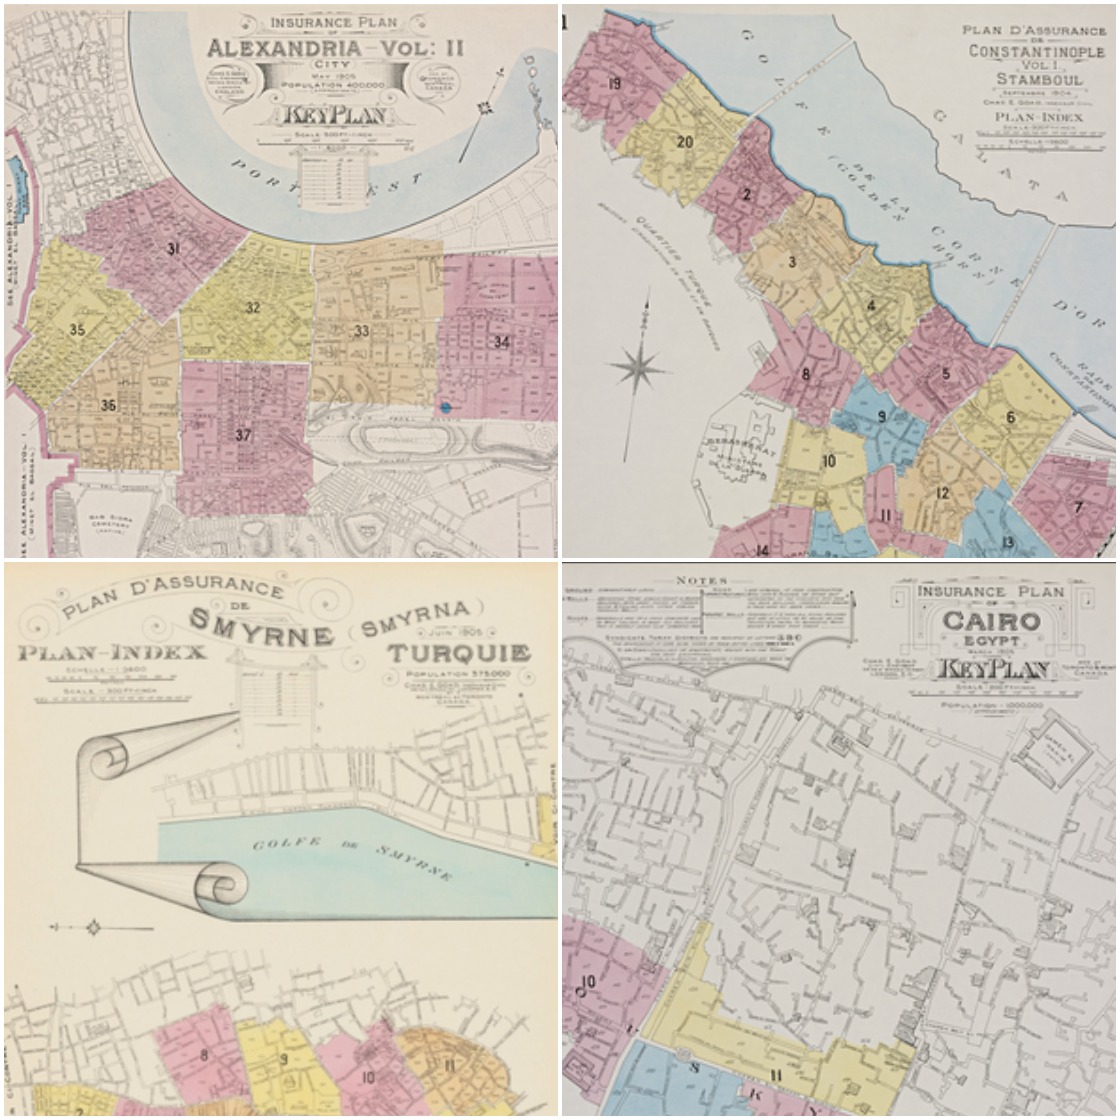 Insurance Maps of Turkey and Istanbul